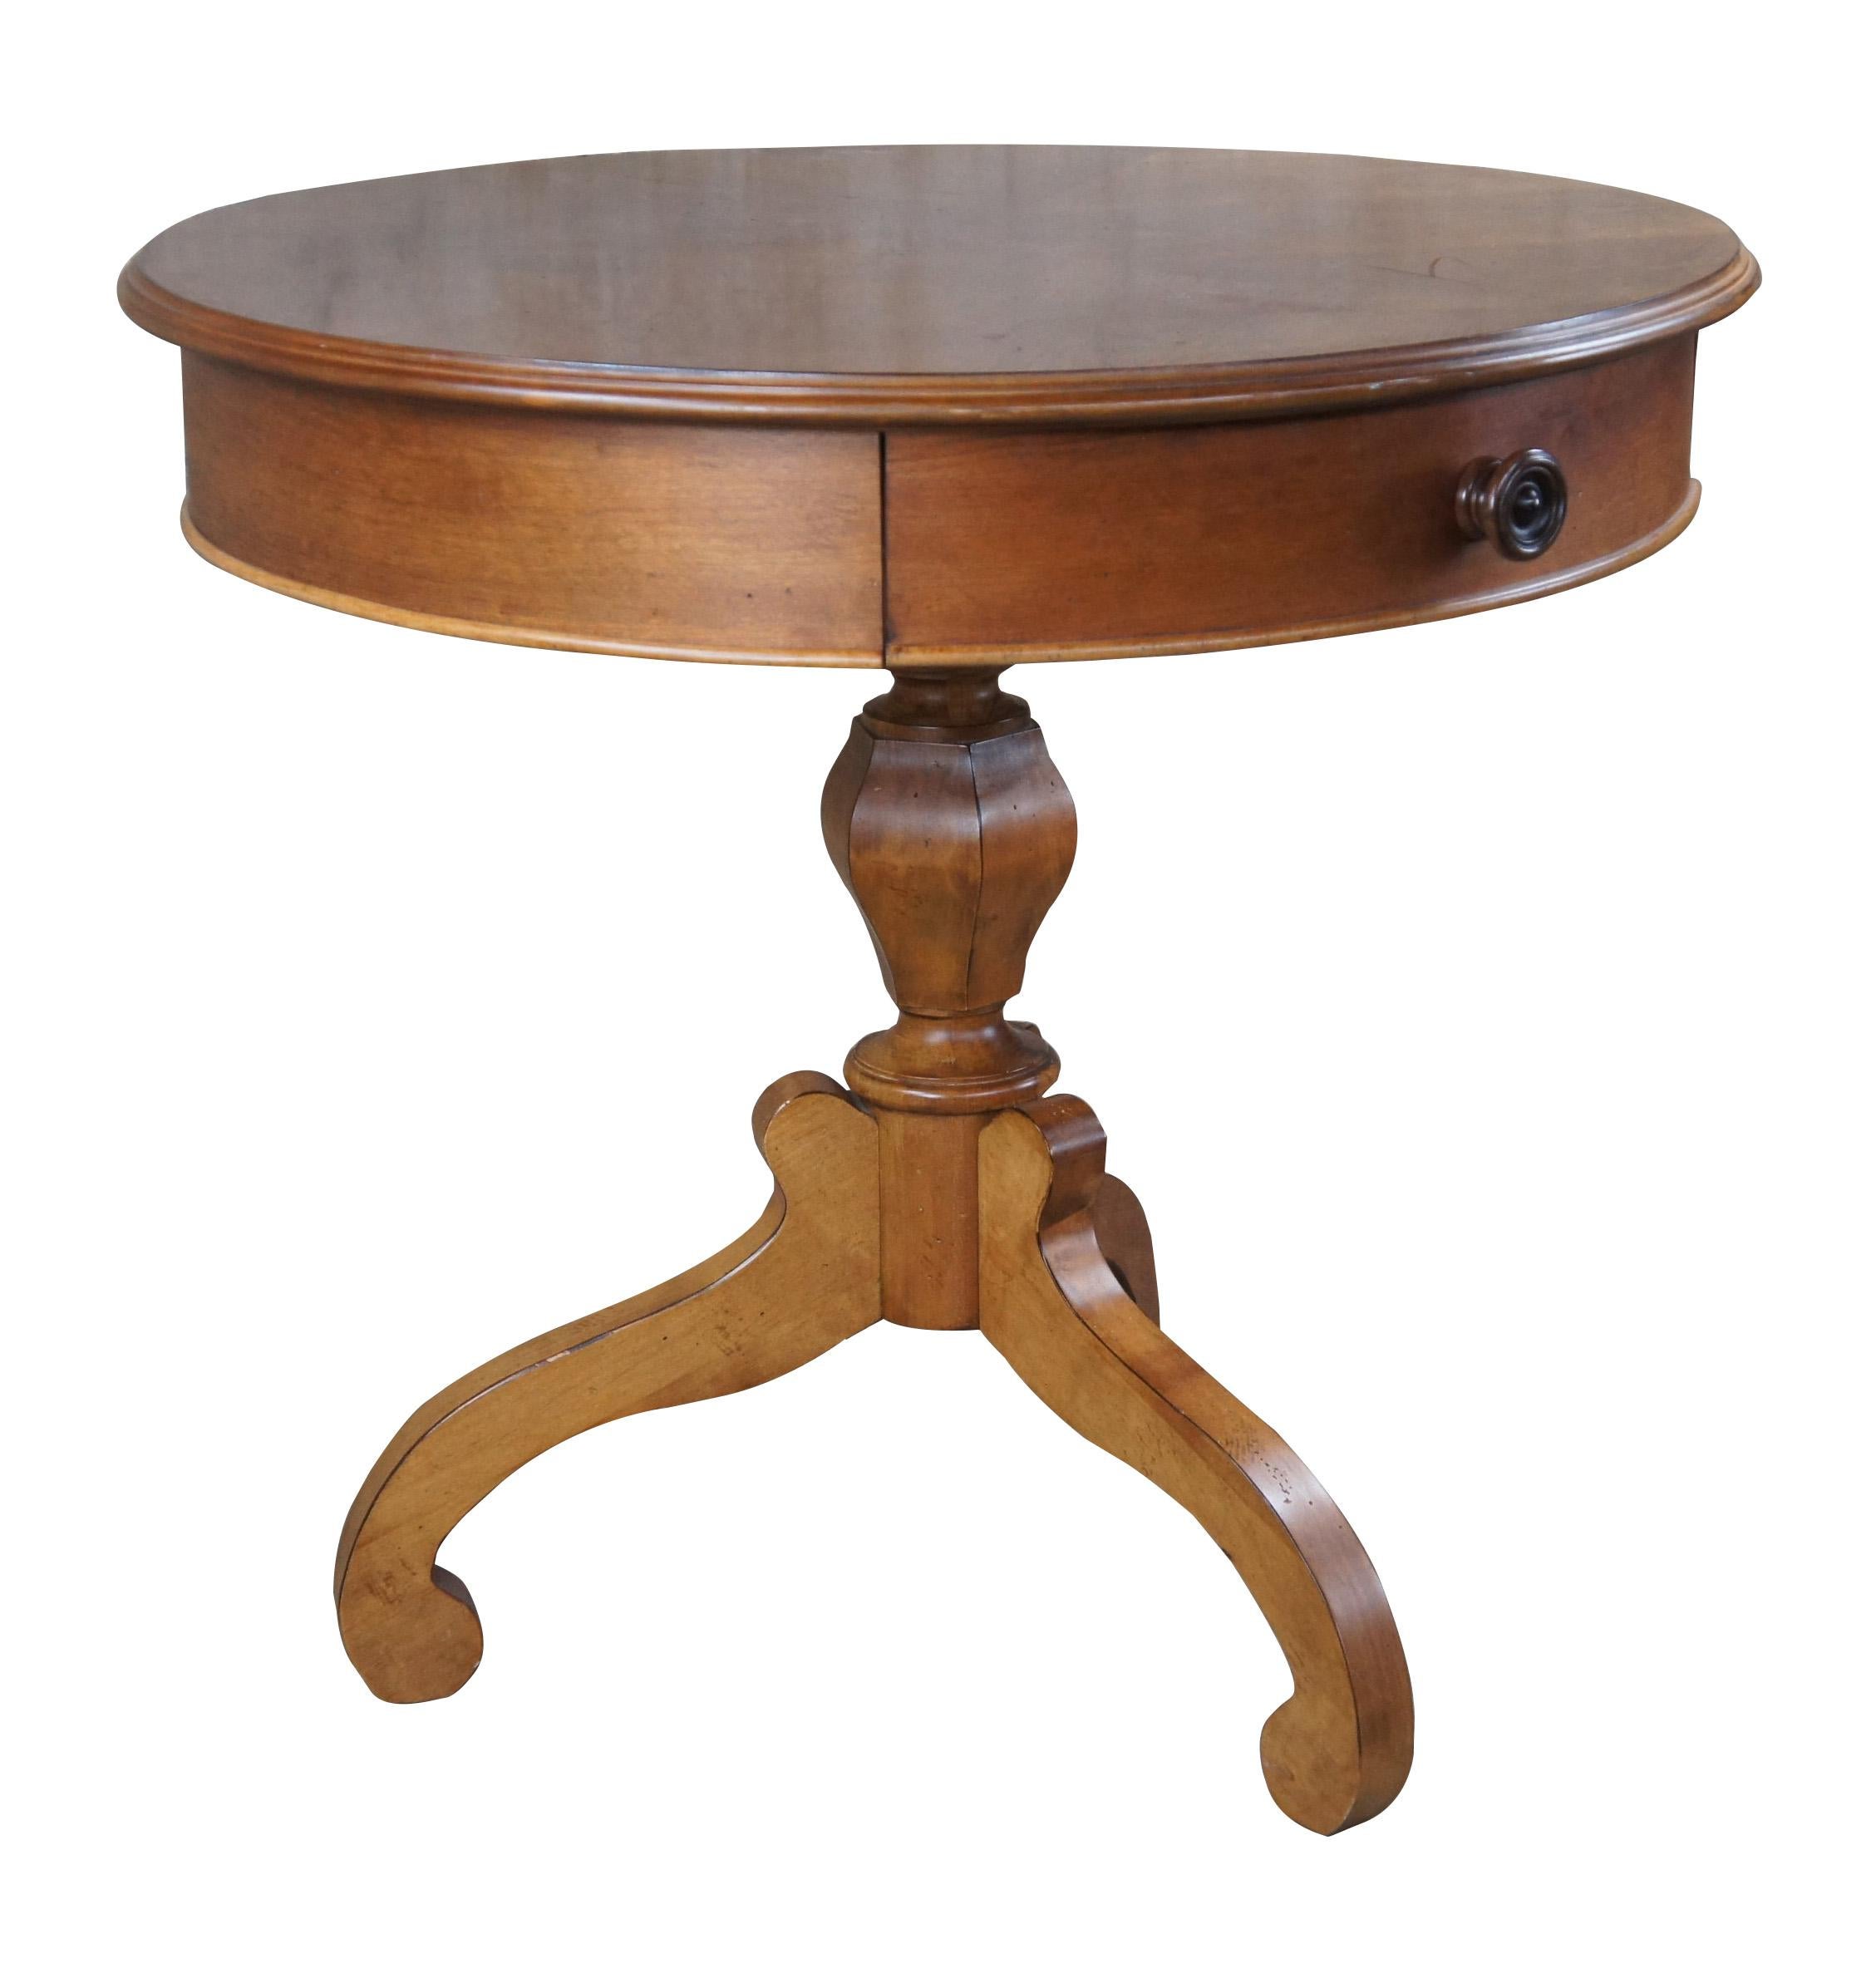 Vintage Eddie Bauer Lifestyles by Lane Furniture accent table.  Made of cherry featuring Empire styling with a round form centered by one drawer over turned baluster support scrolled feet.
 
307, 485-34, Made in USA.

Dimensions:
32